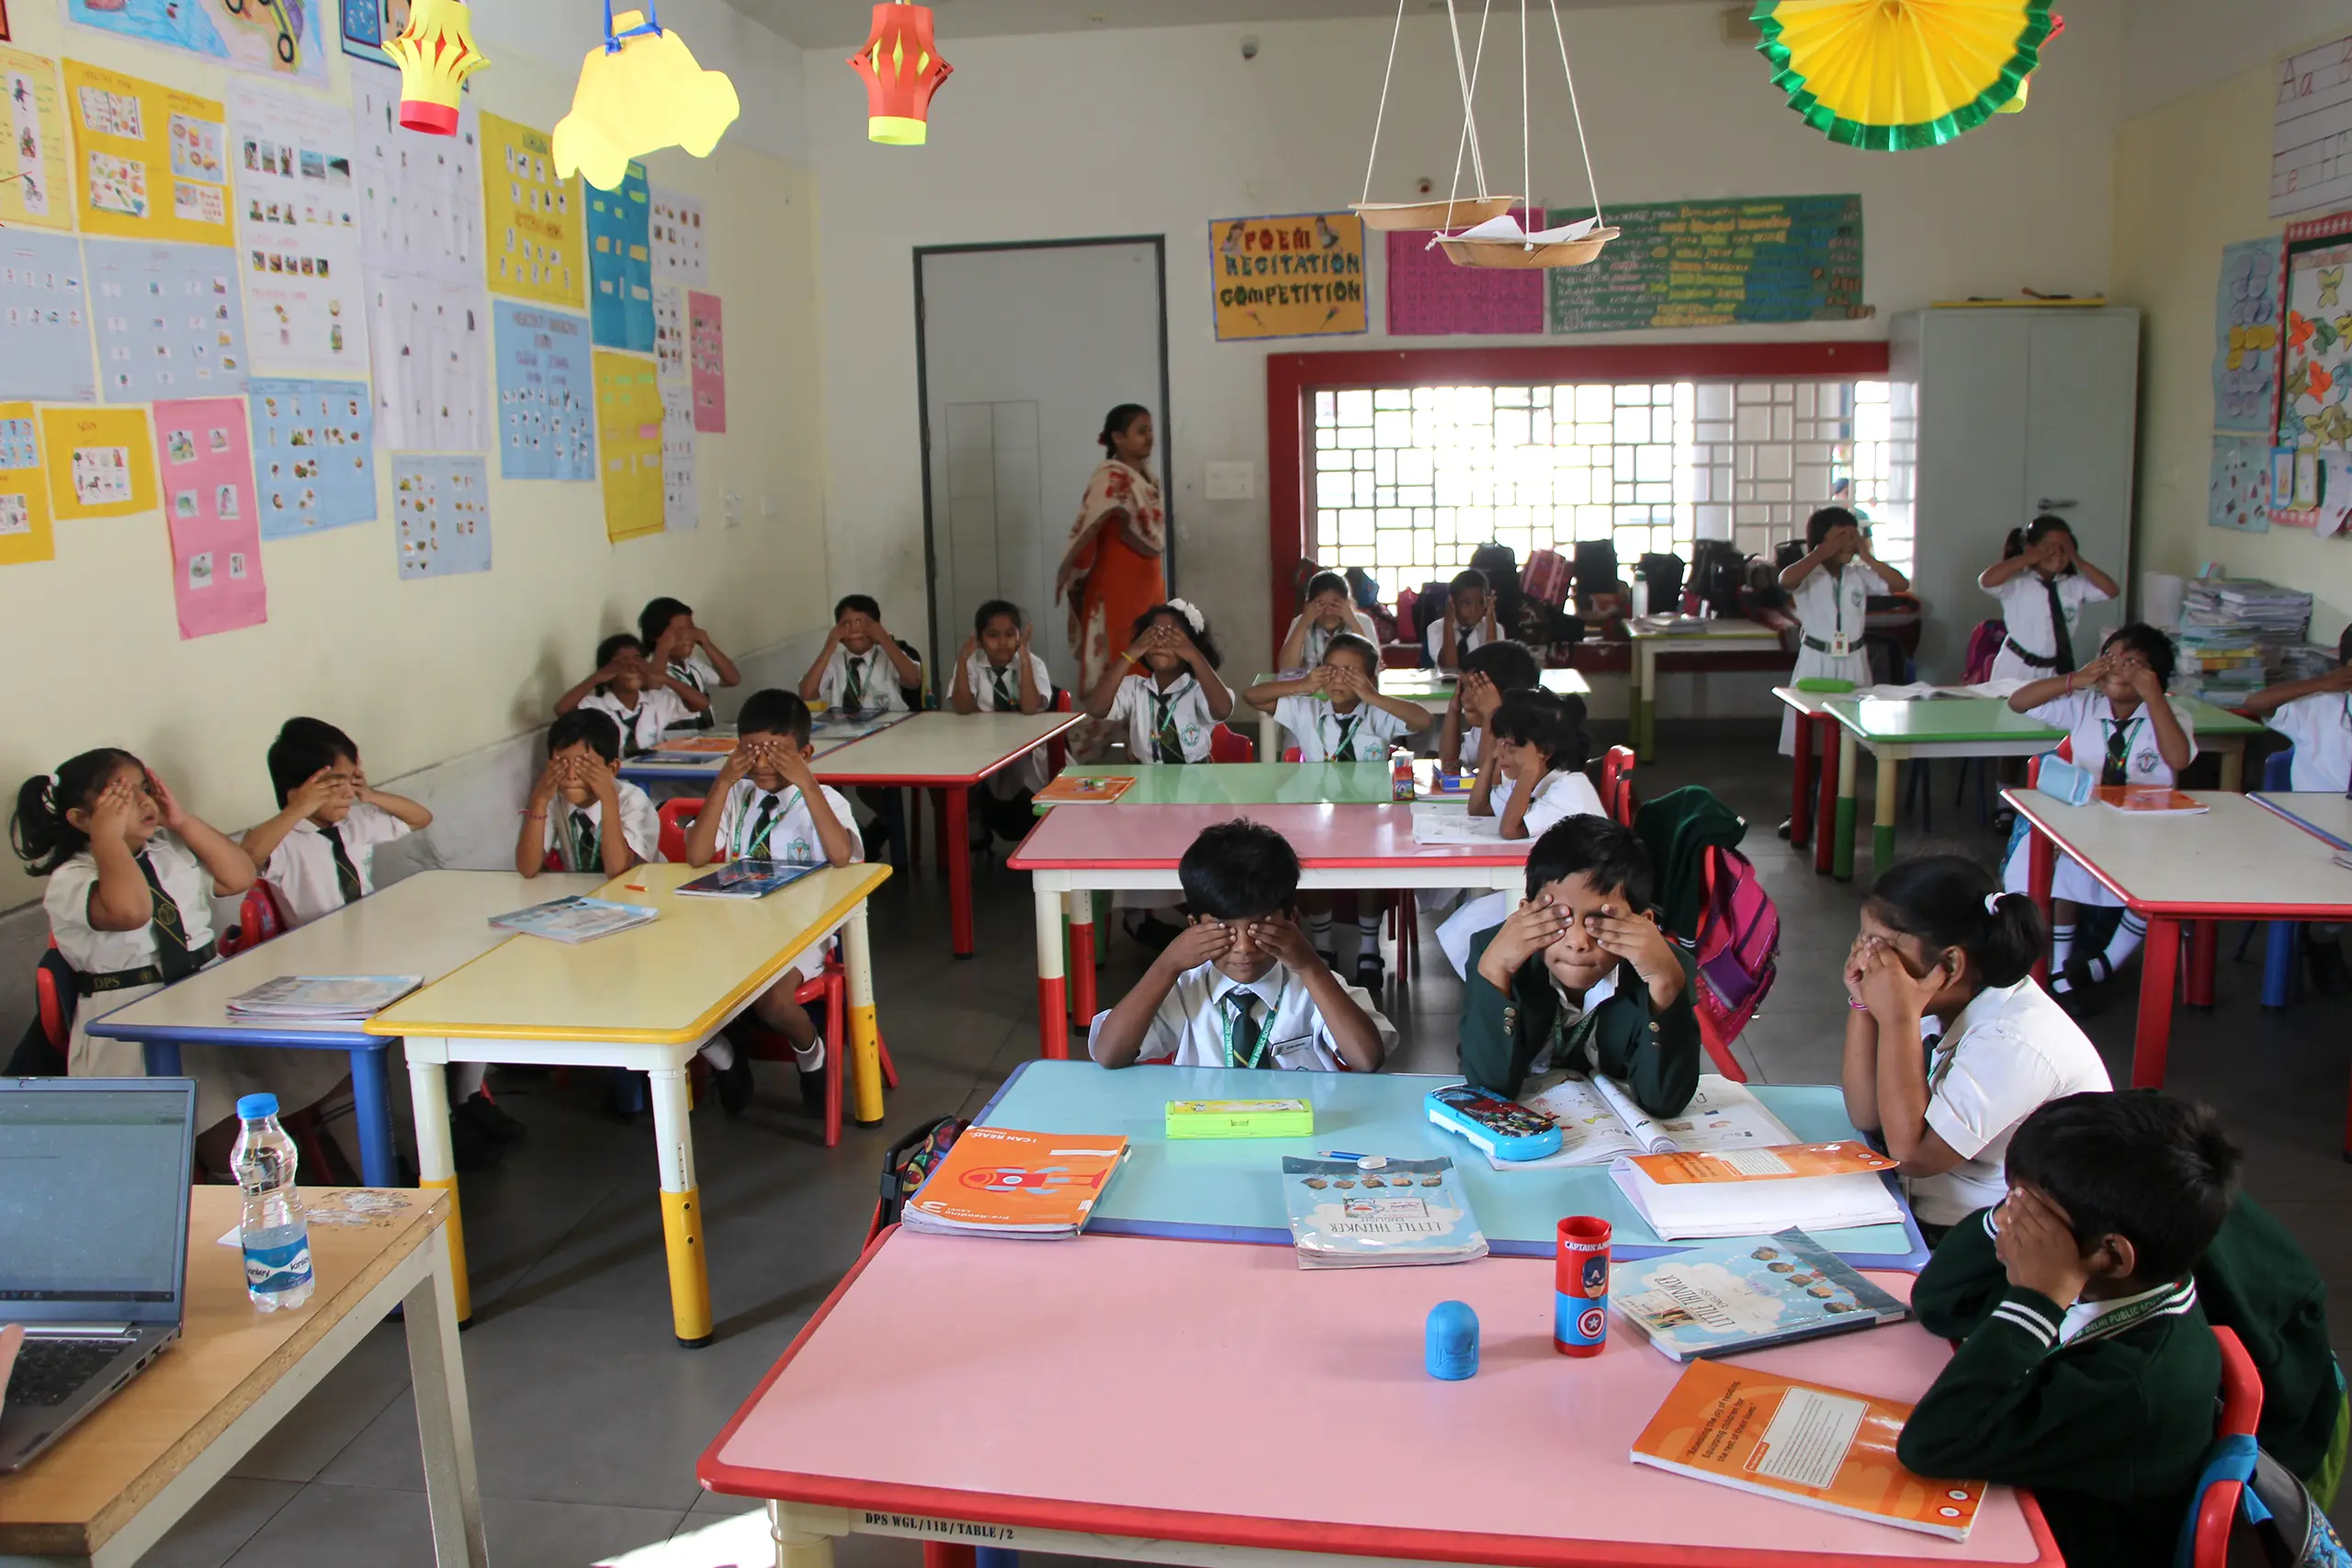 Students sitting in the class with eyes closed as a part of some activity performed in DPS Warangal.